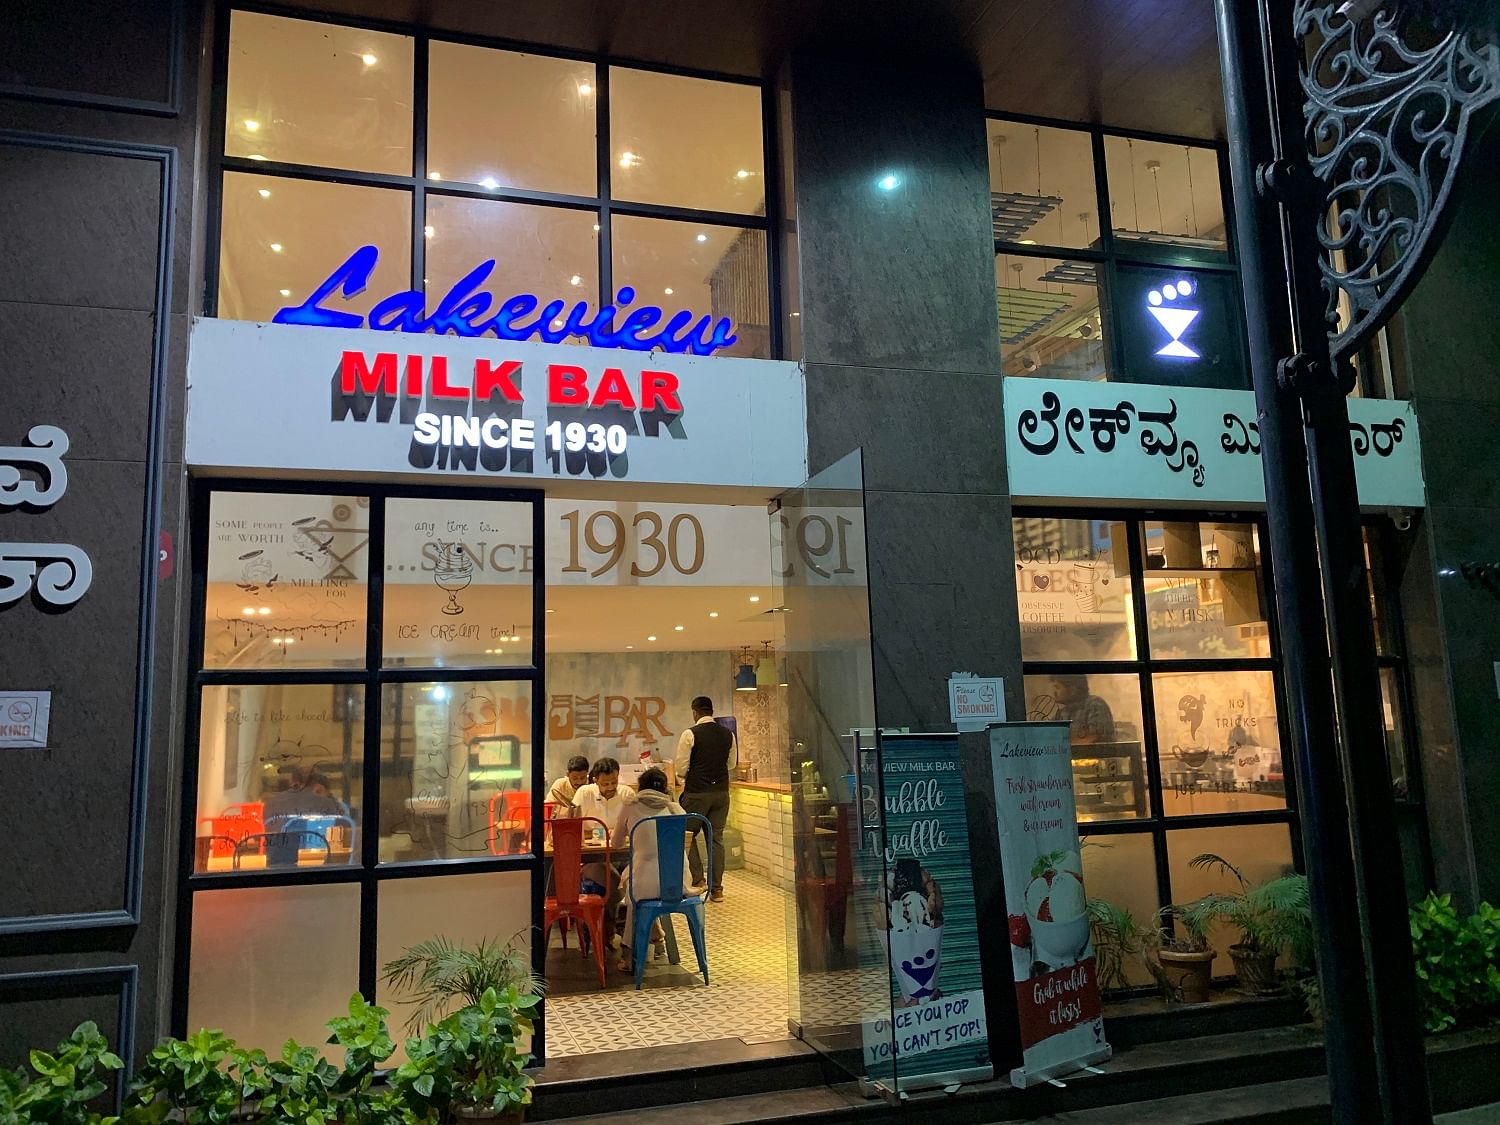 Lakeview Milkbar is one of the oldest ice cream parlours in the city.